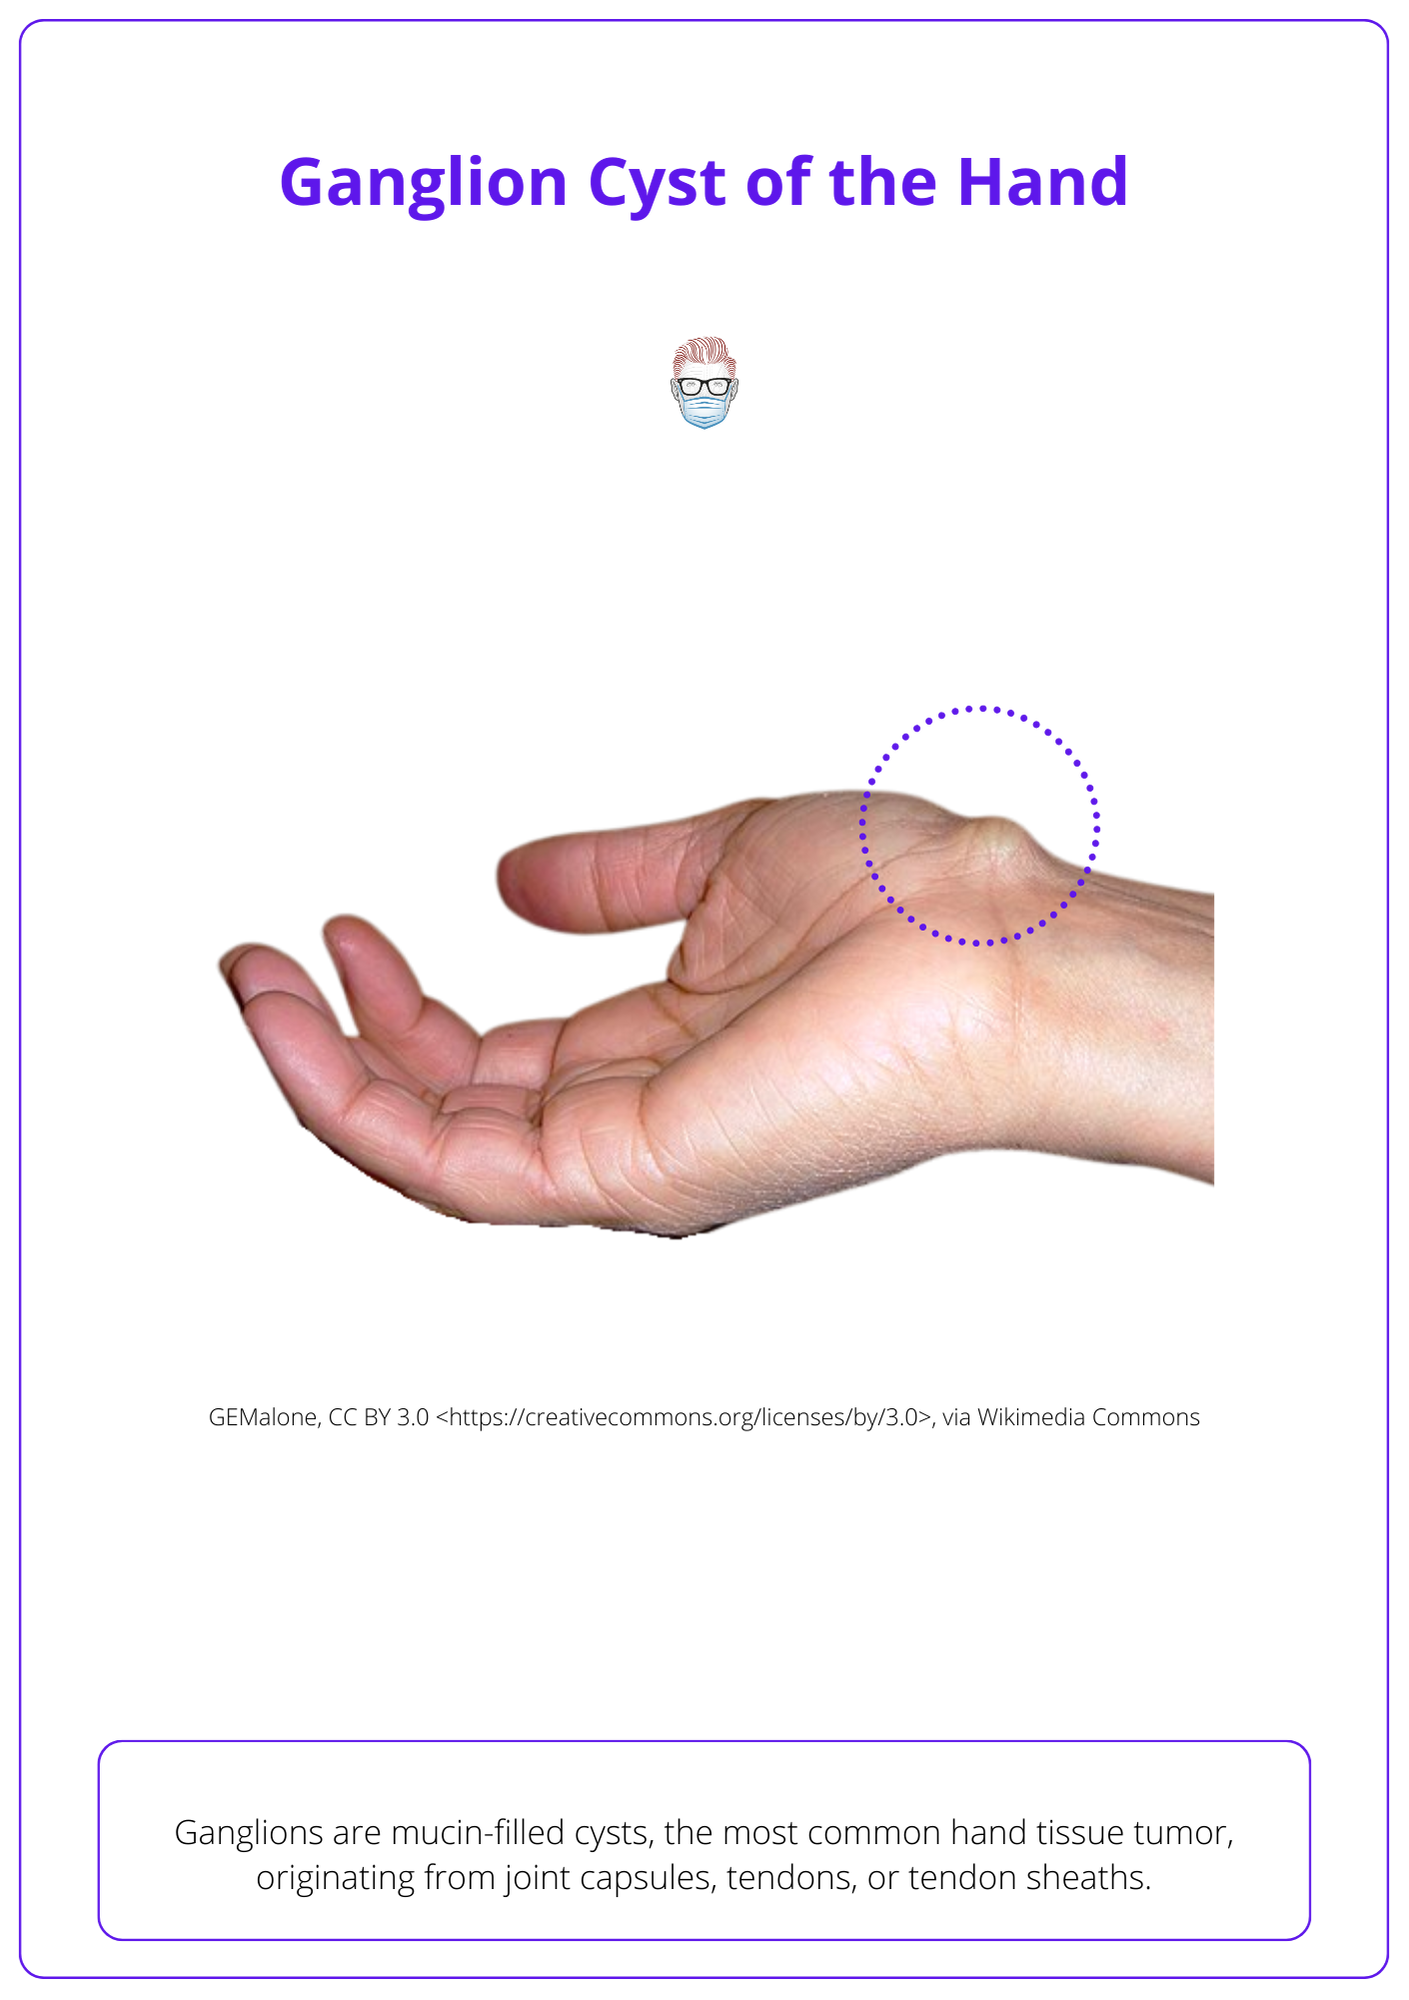 This image shows Ganglion Cysts of the hand